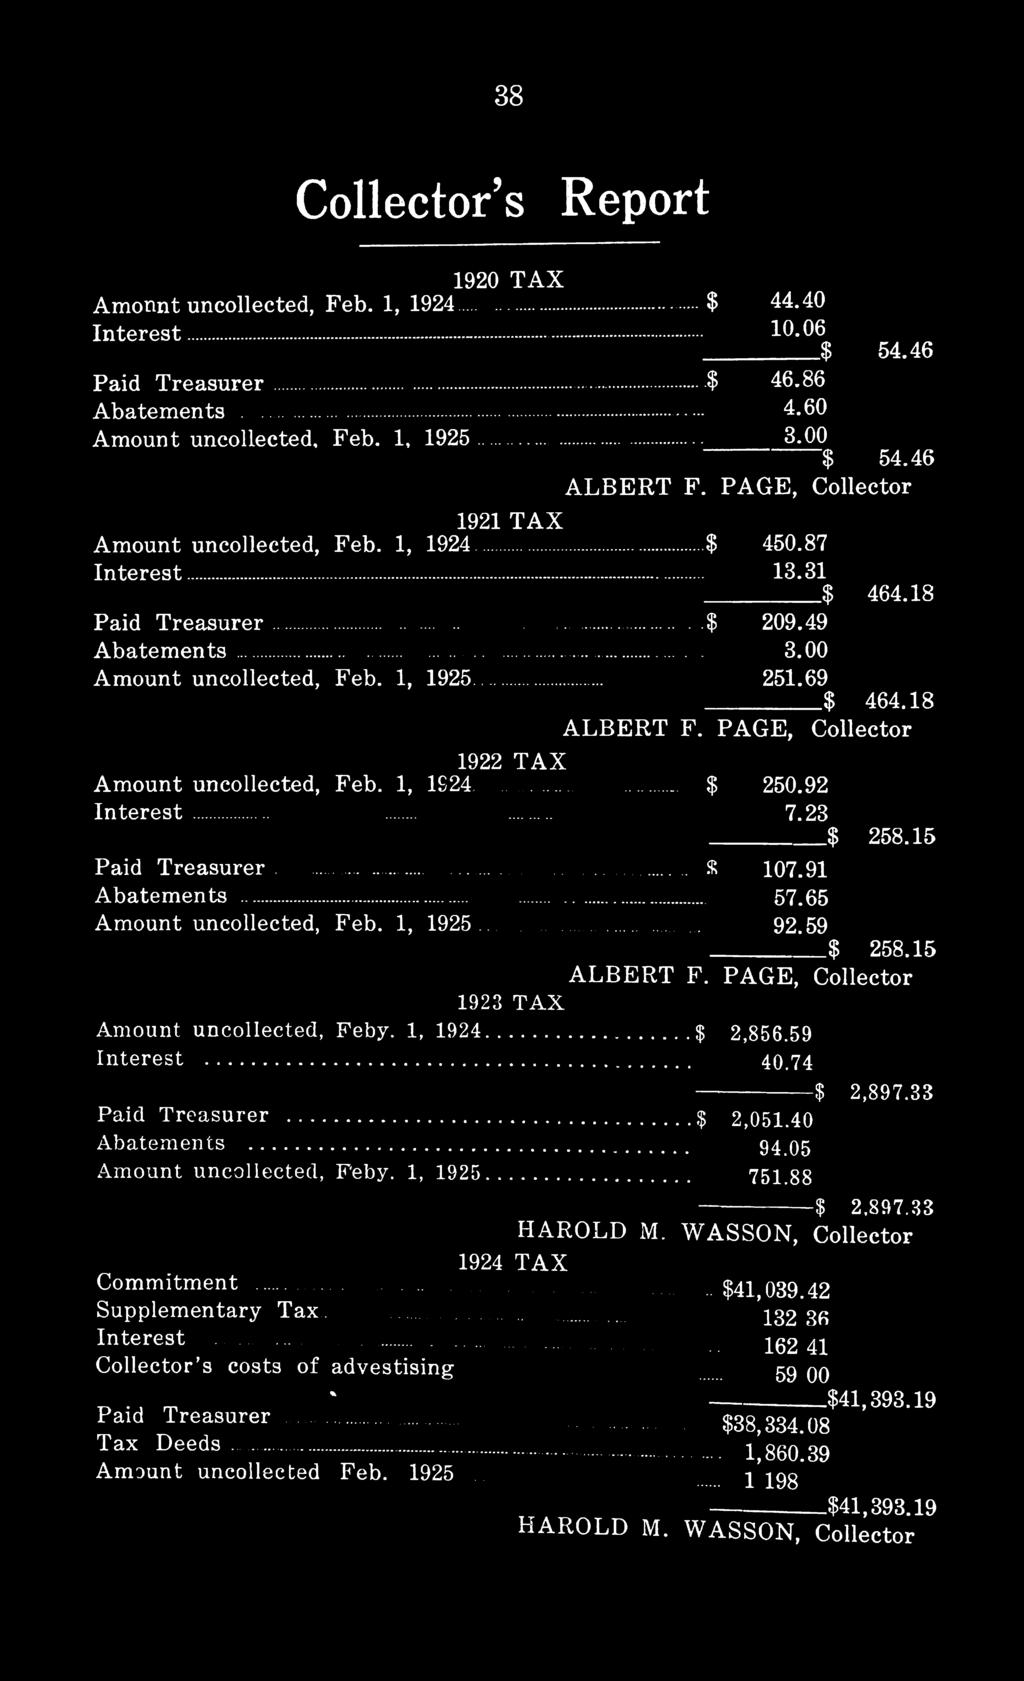 69 $ 464.18 ALBERT F. PAGE, Collector 1922 TAX Amount uncollected, Feb. 1, 1S24 $ 250.92 Interest 7.23 $ 258.15 Paid Treasurer X 107.91 Abatements 57.65 Amount uncollected, Feb. 1, 1925... 92.